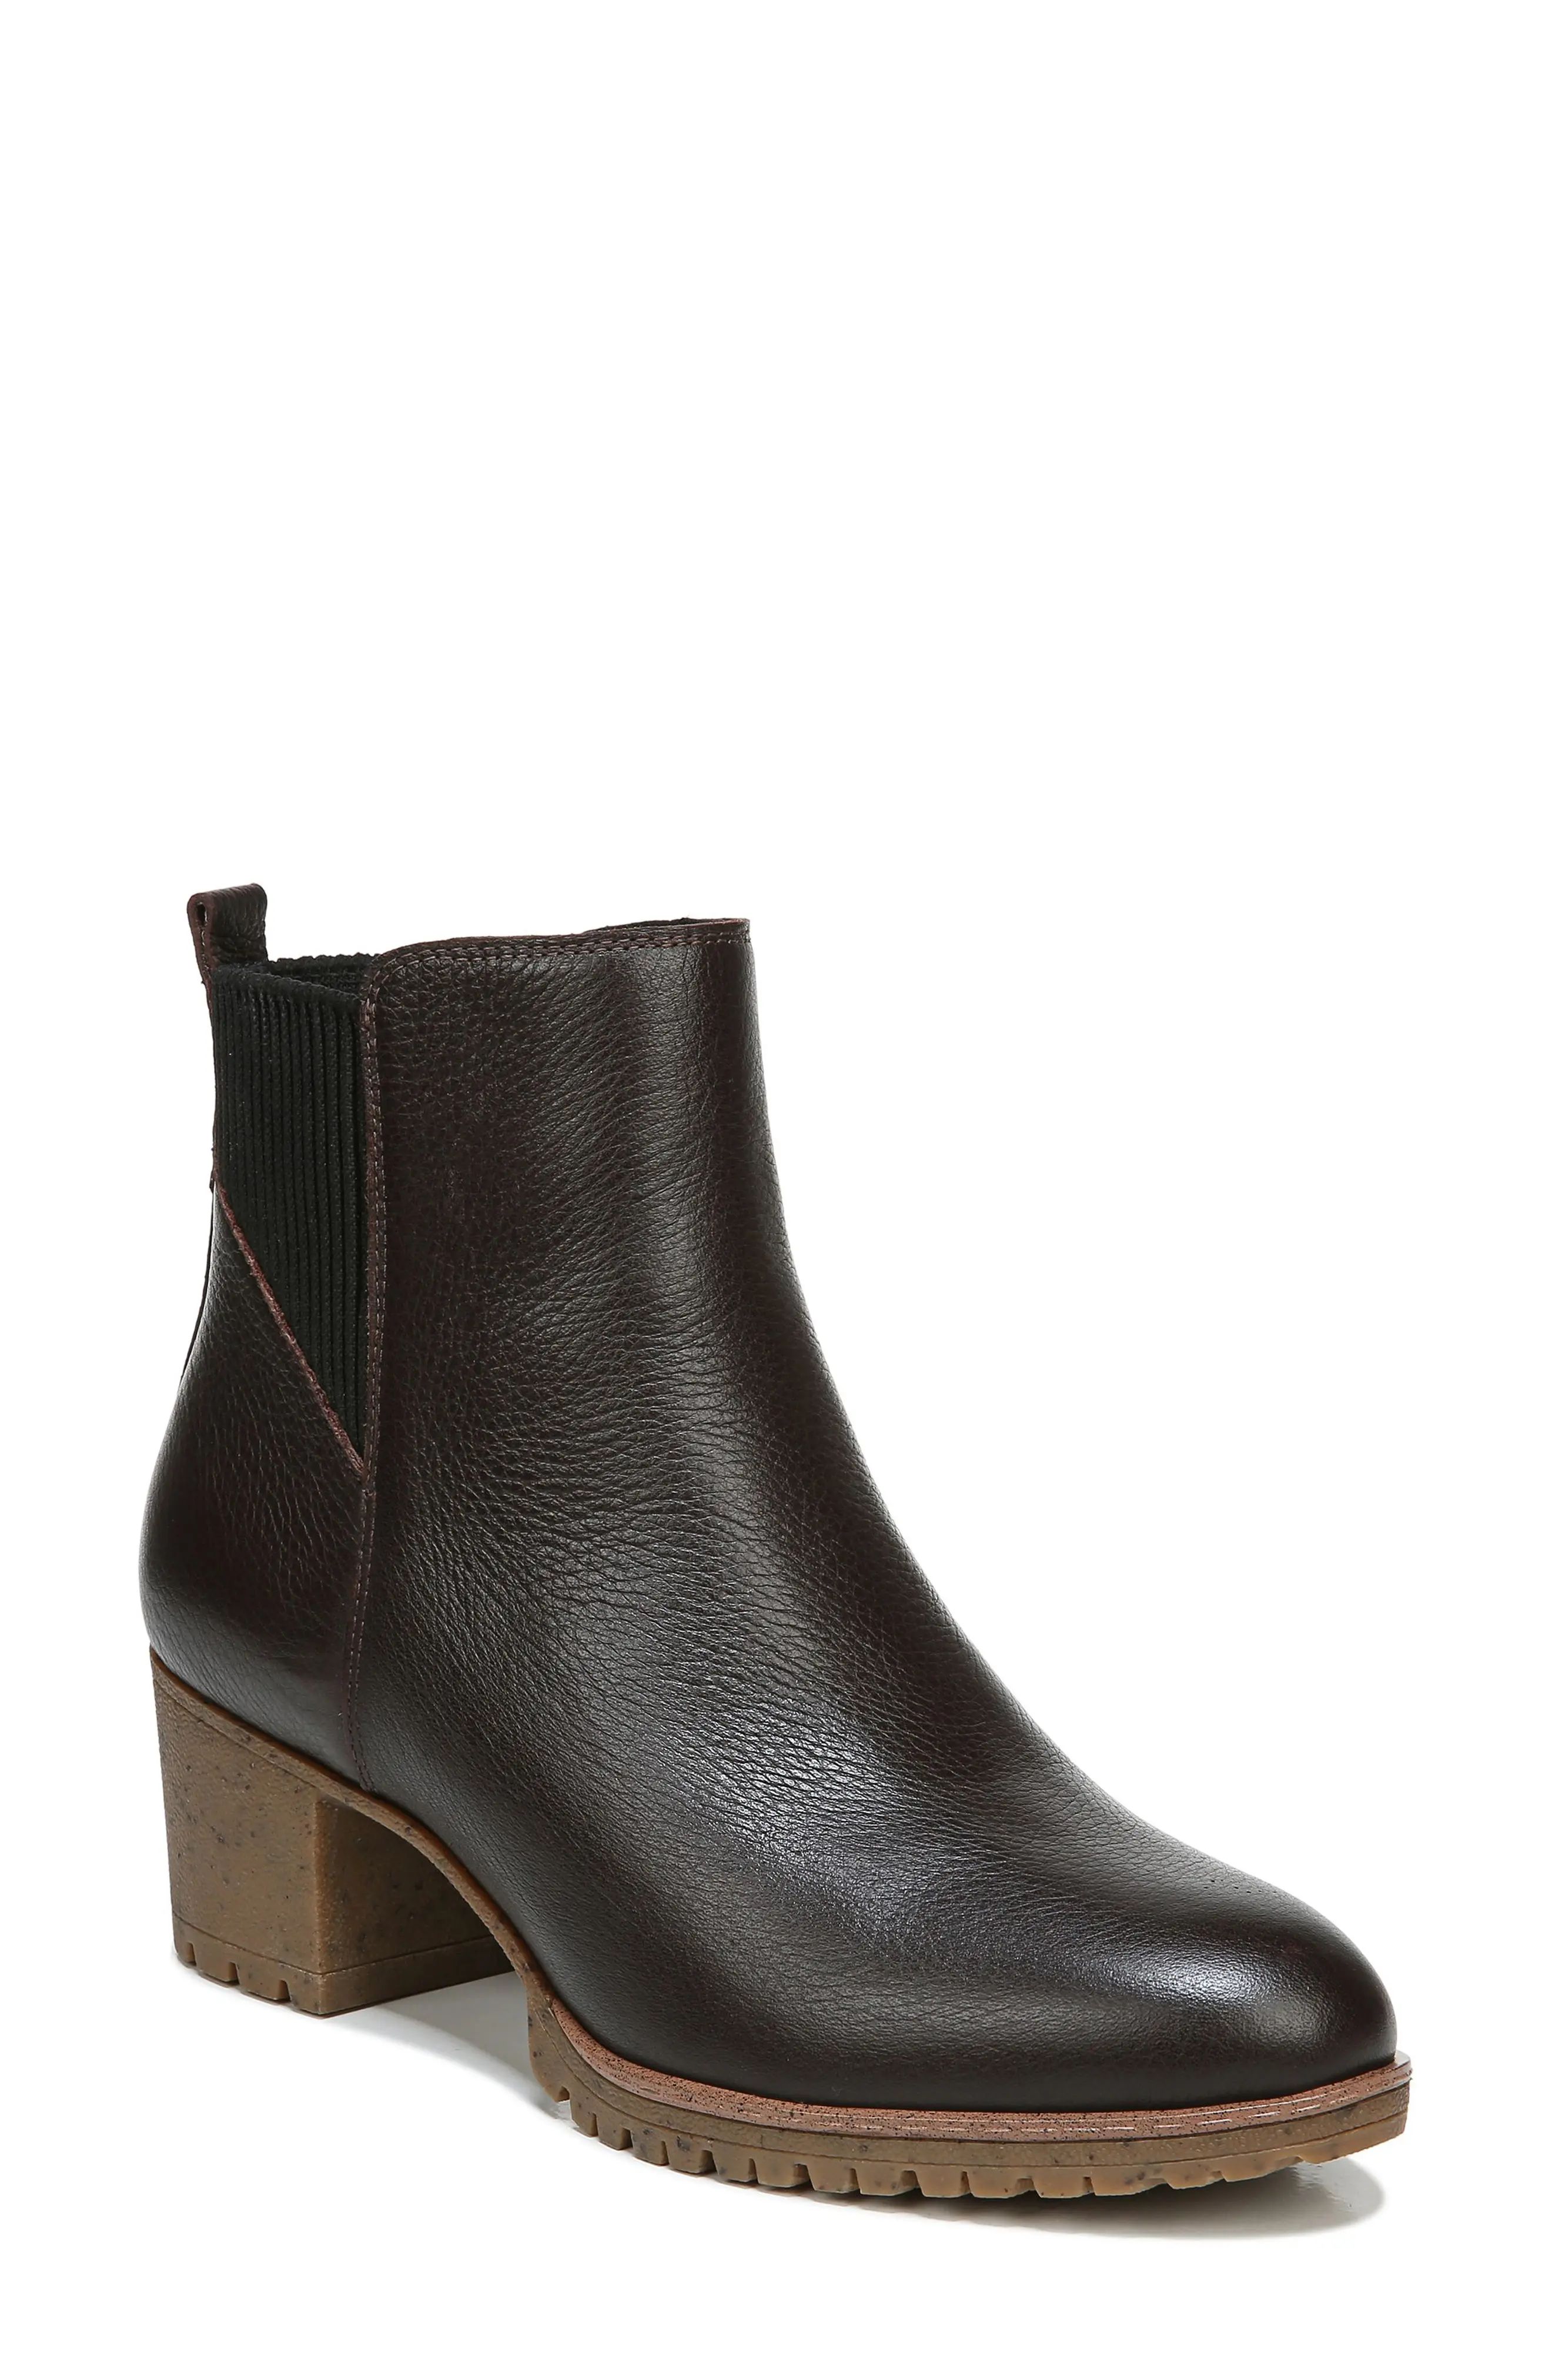 Dr. Scholl's Lively Waterproof Bootie, Size 9.5 in Brown Leather at Nordstrom | Nordstrom